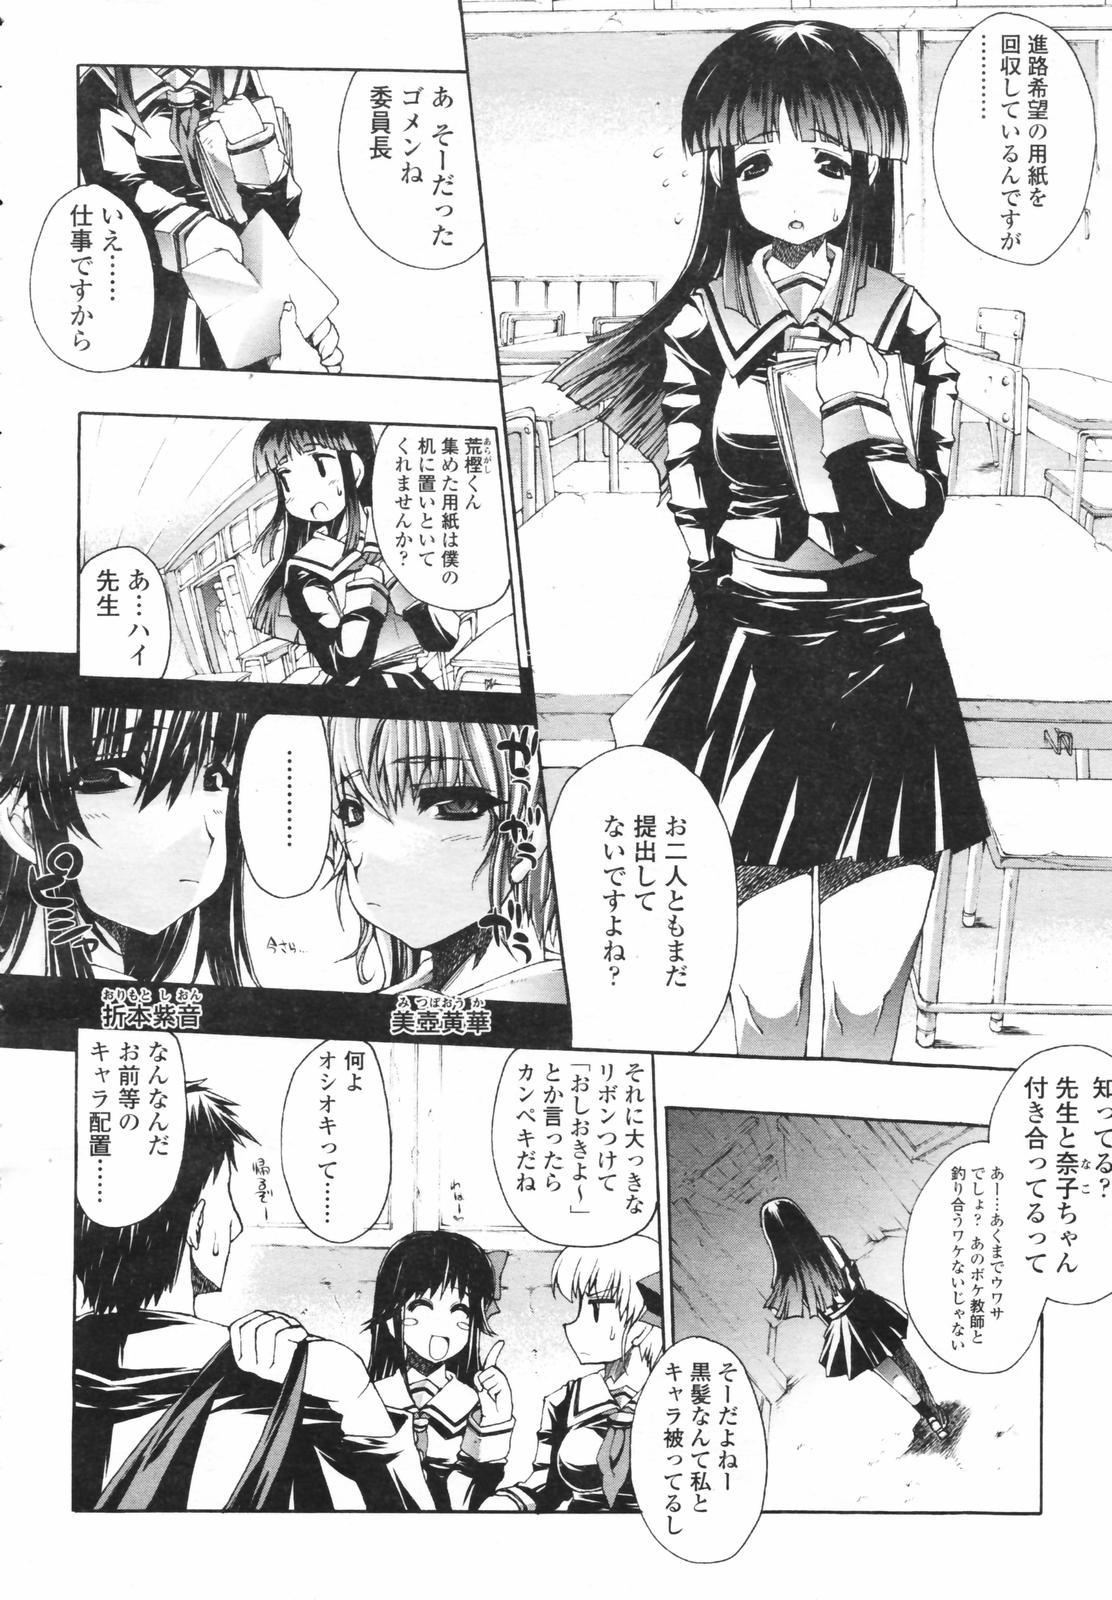 Sixtynine COMIC Tenma 2007-02 Vol. 105 Facesitting - Page 10